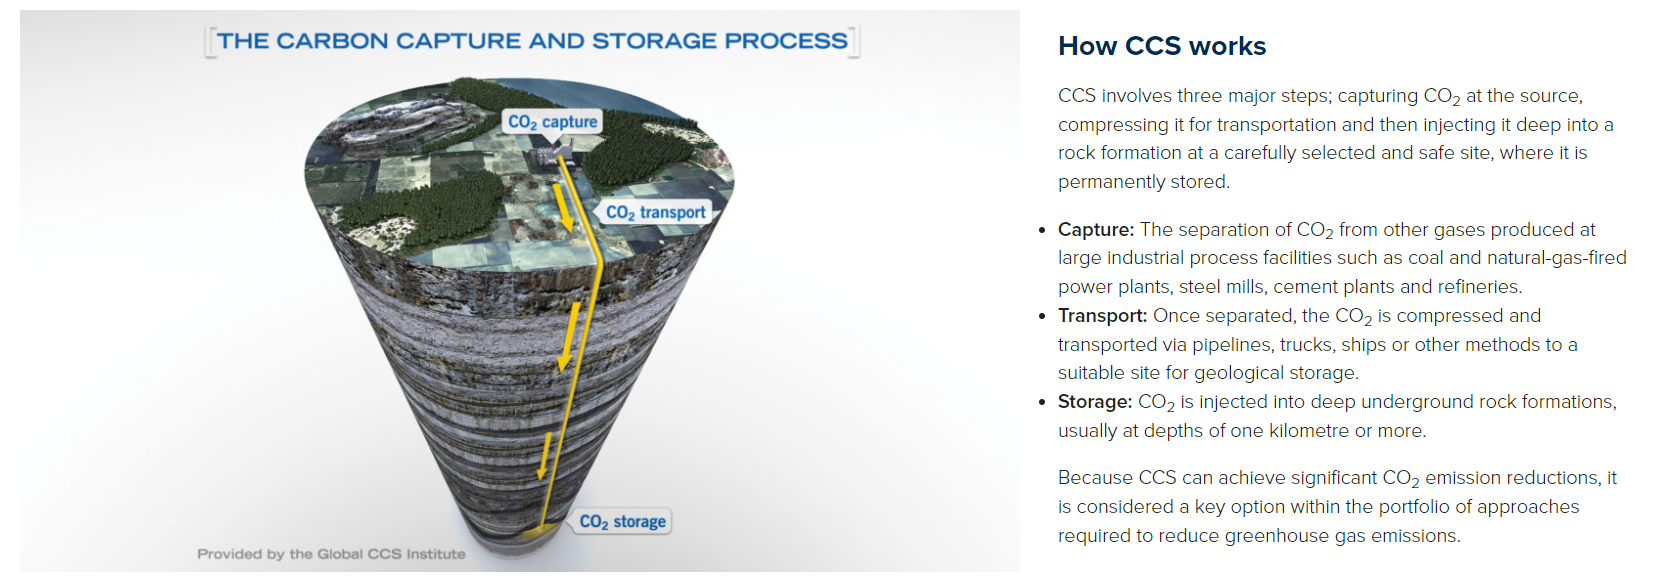 how CCS works